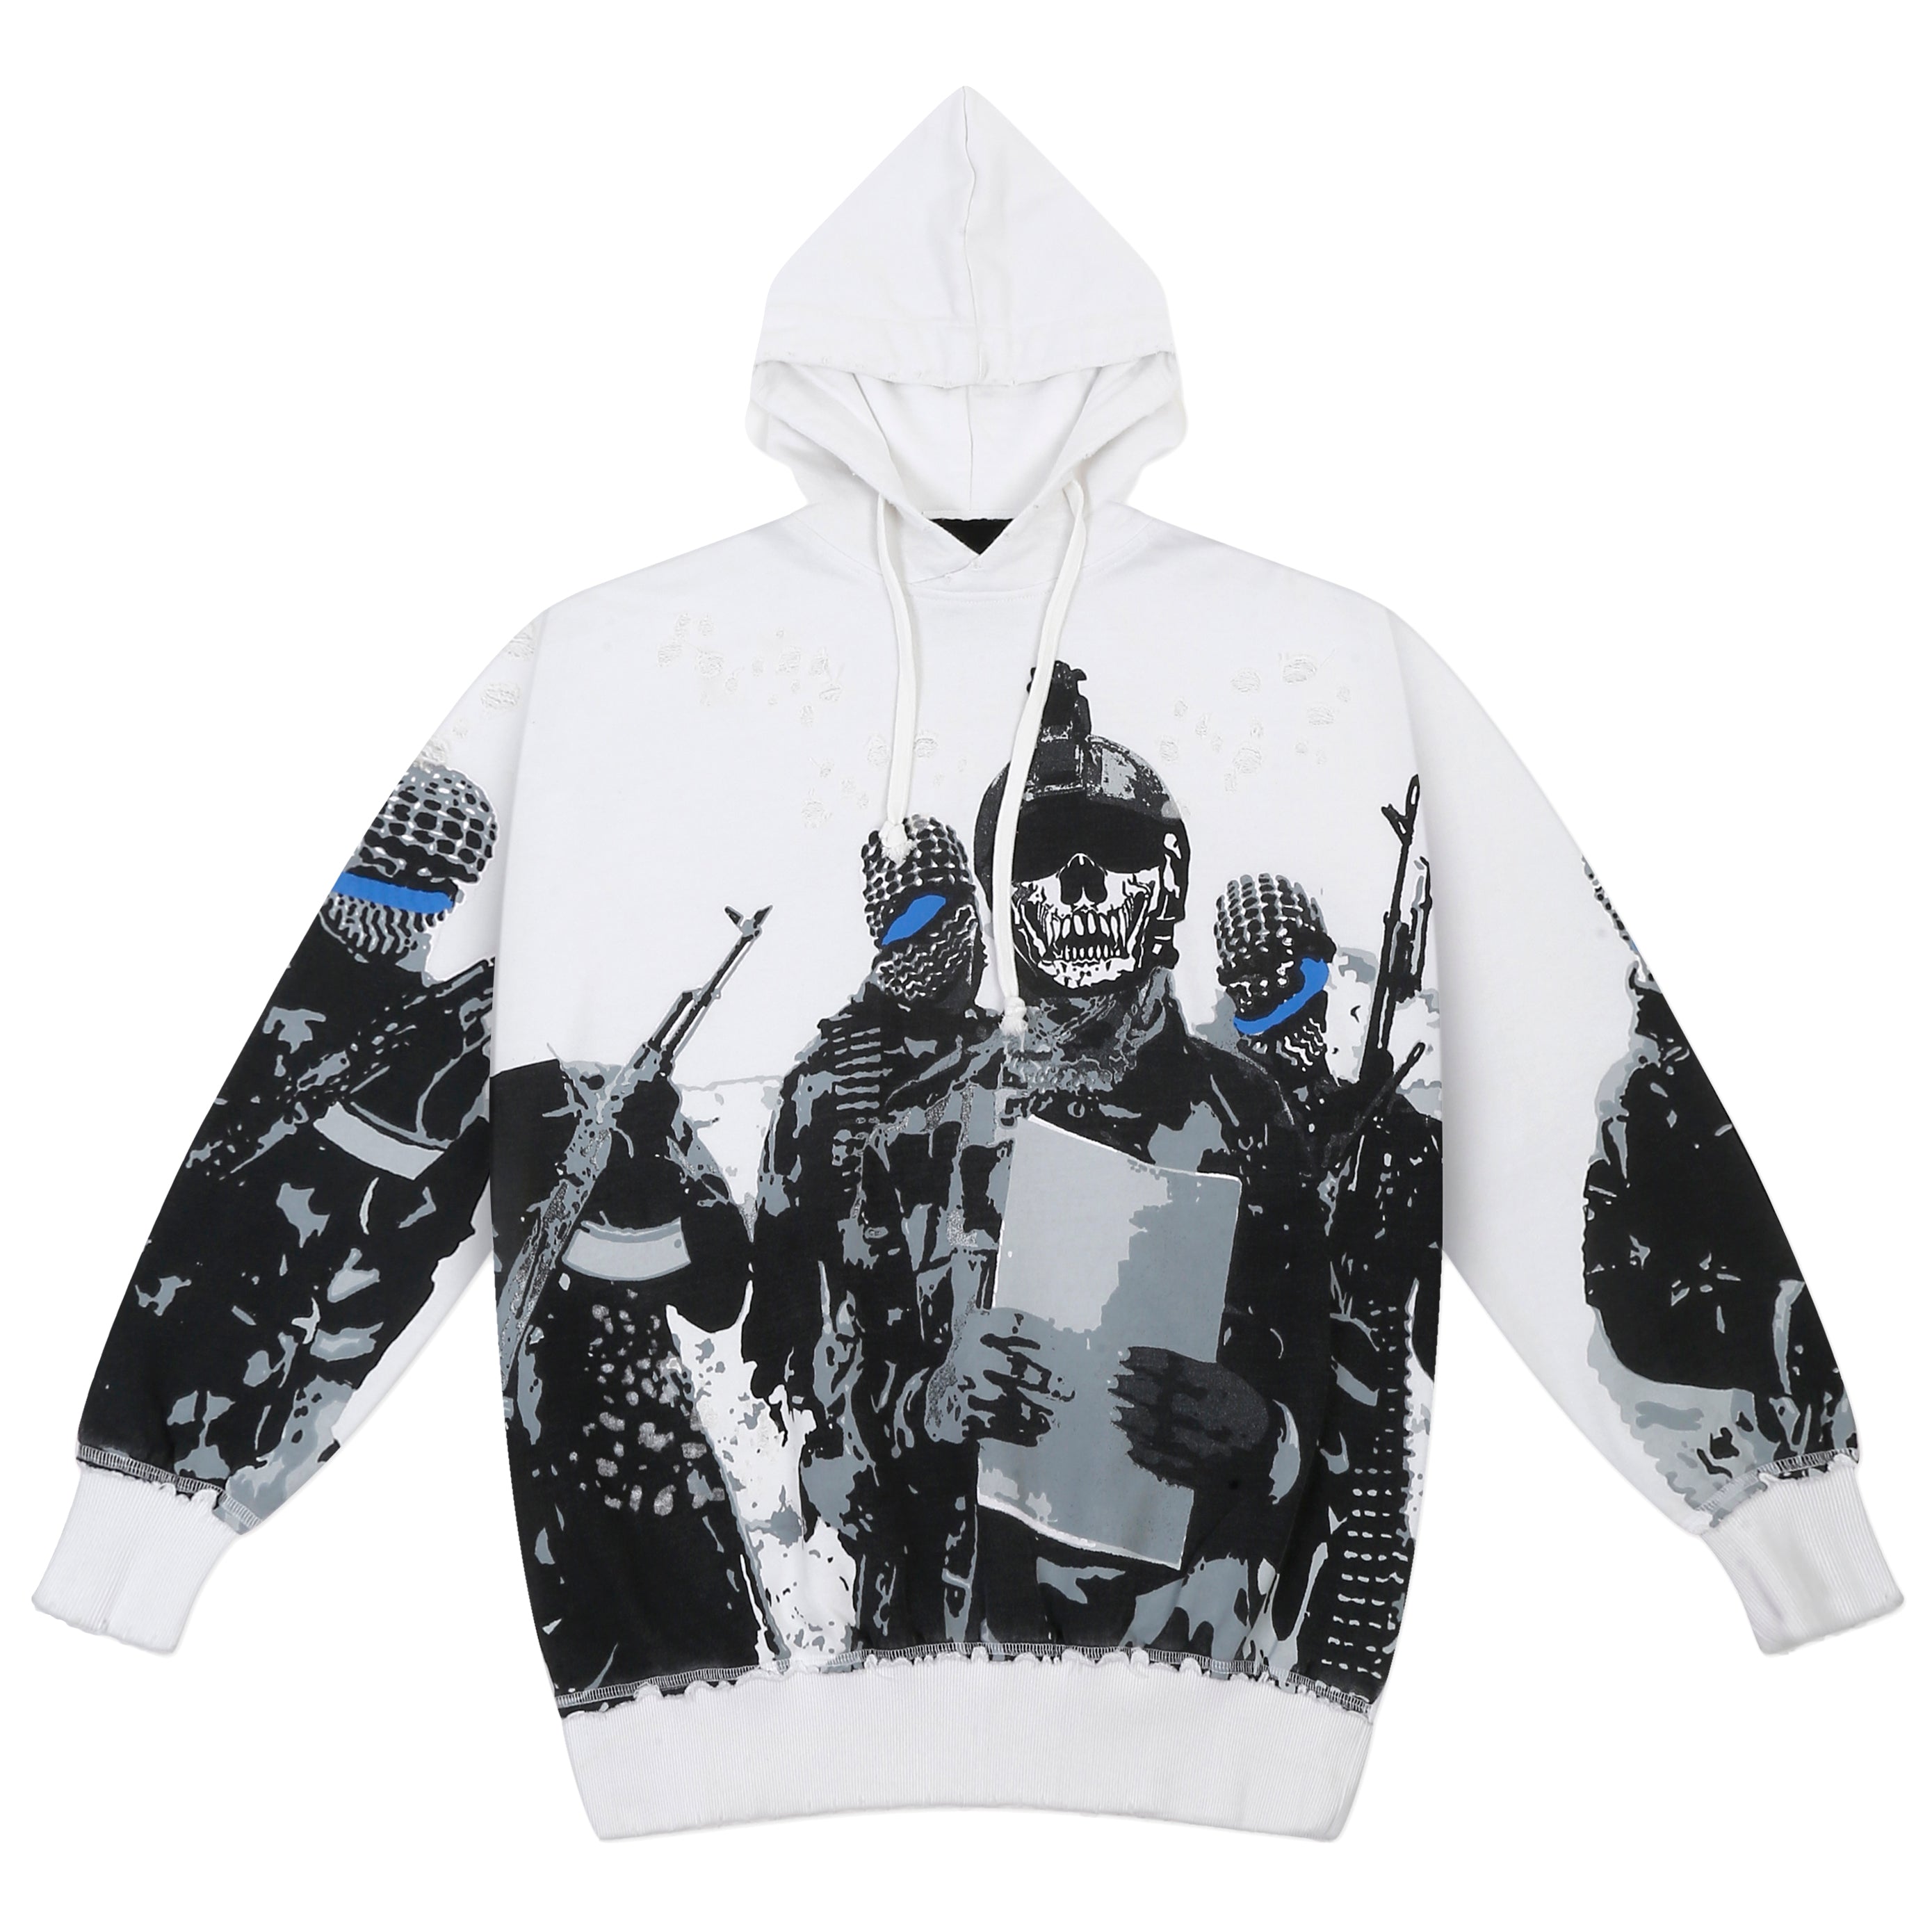 Hoodie - White "Shoot At Sight"